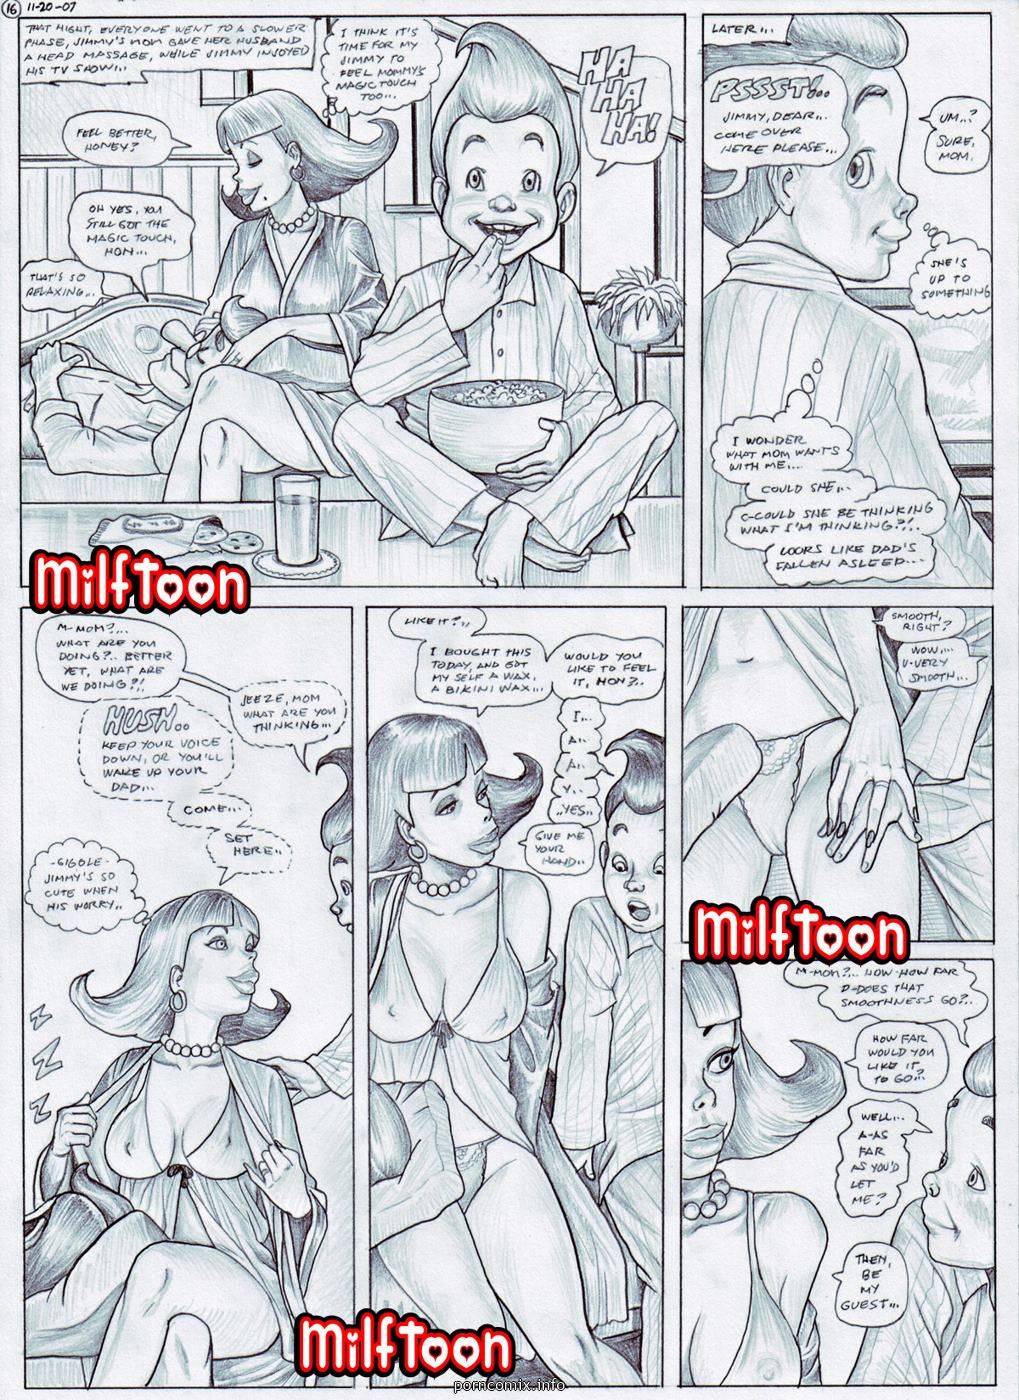 Milftoon - Jimmy Naitron page 17